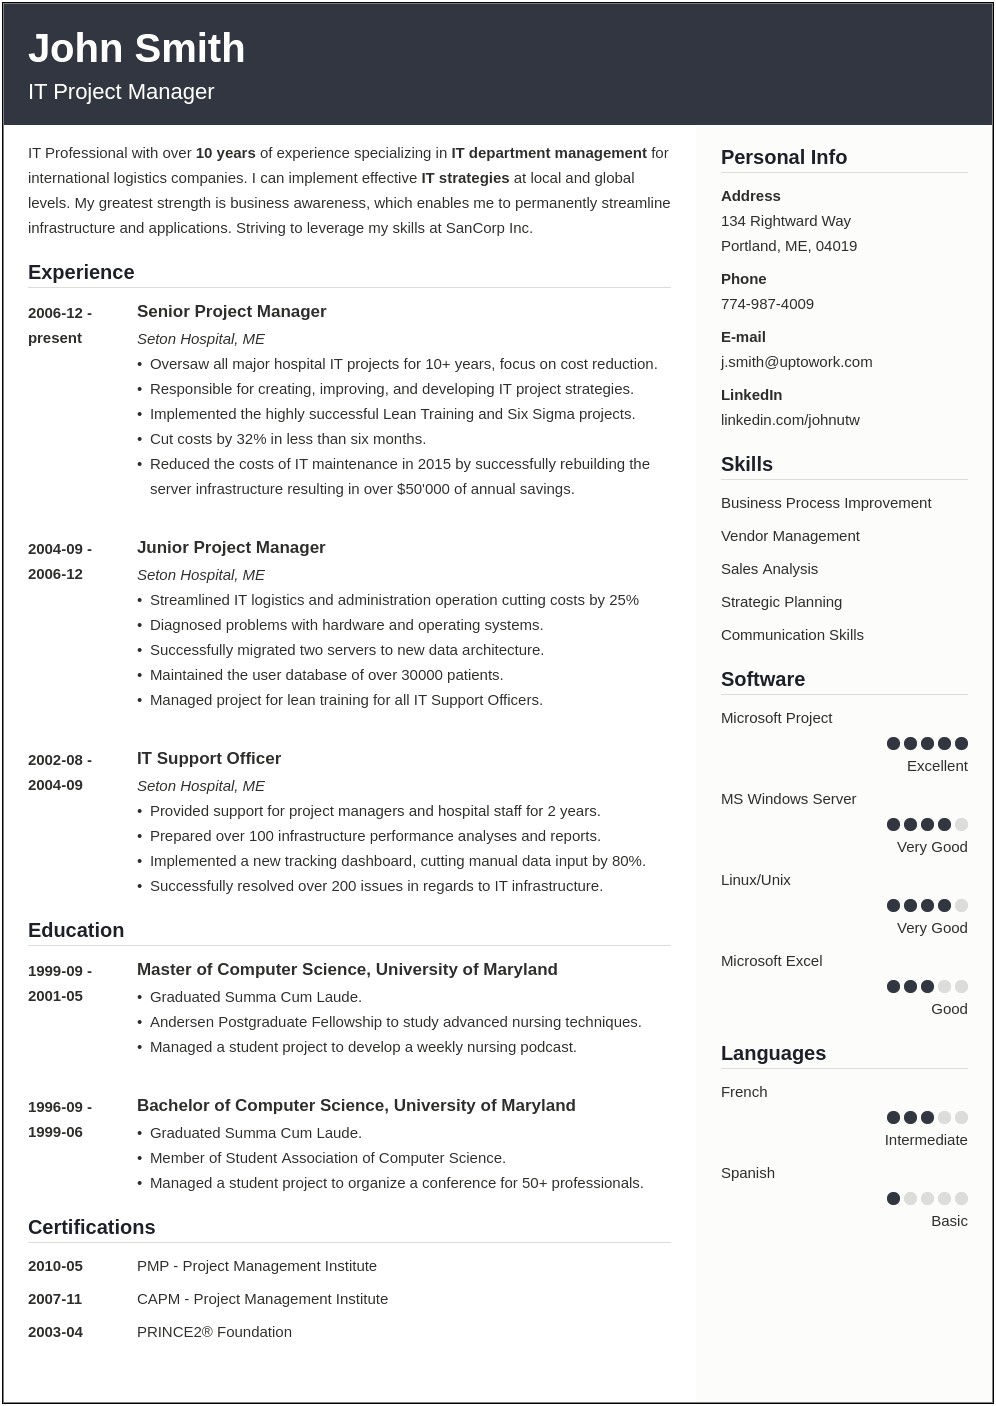 Best Resume Layout To Use